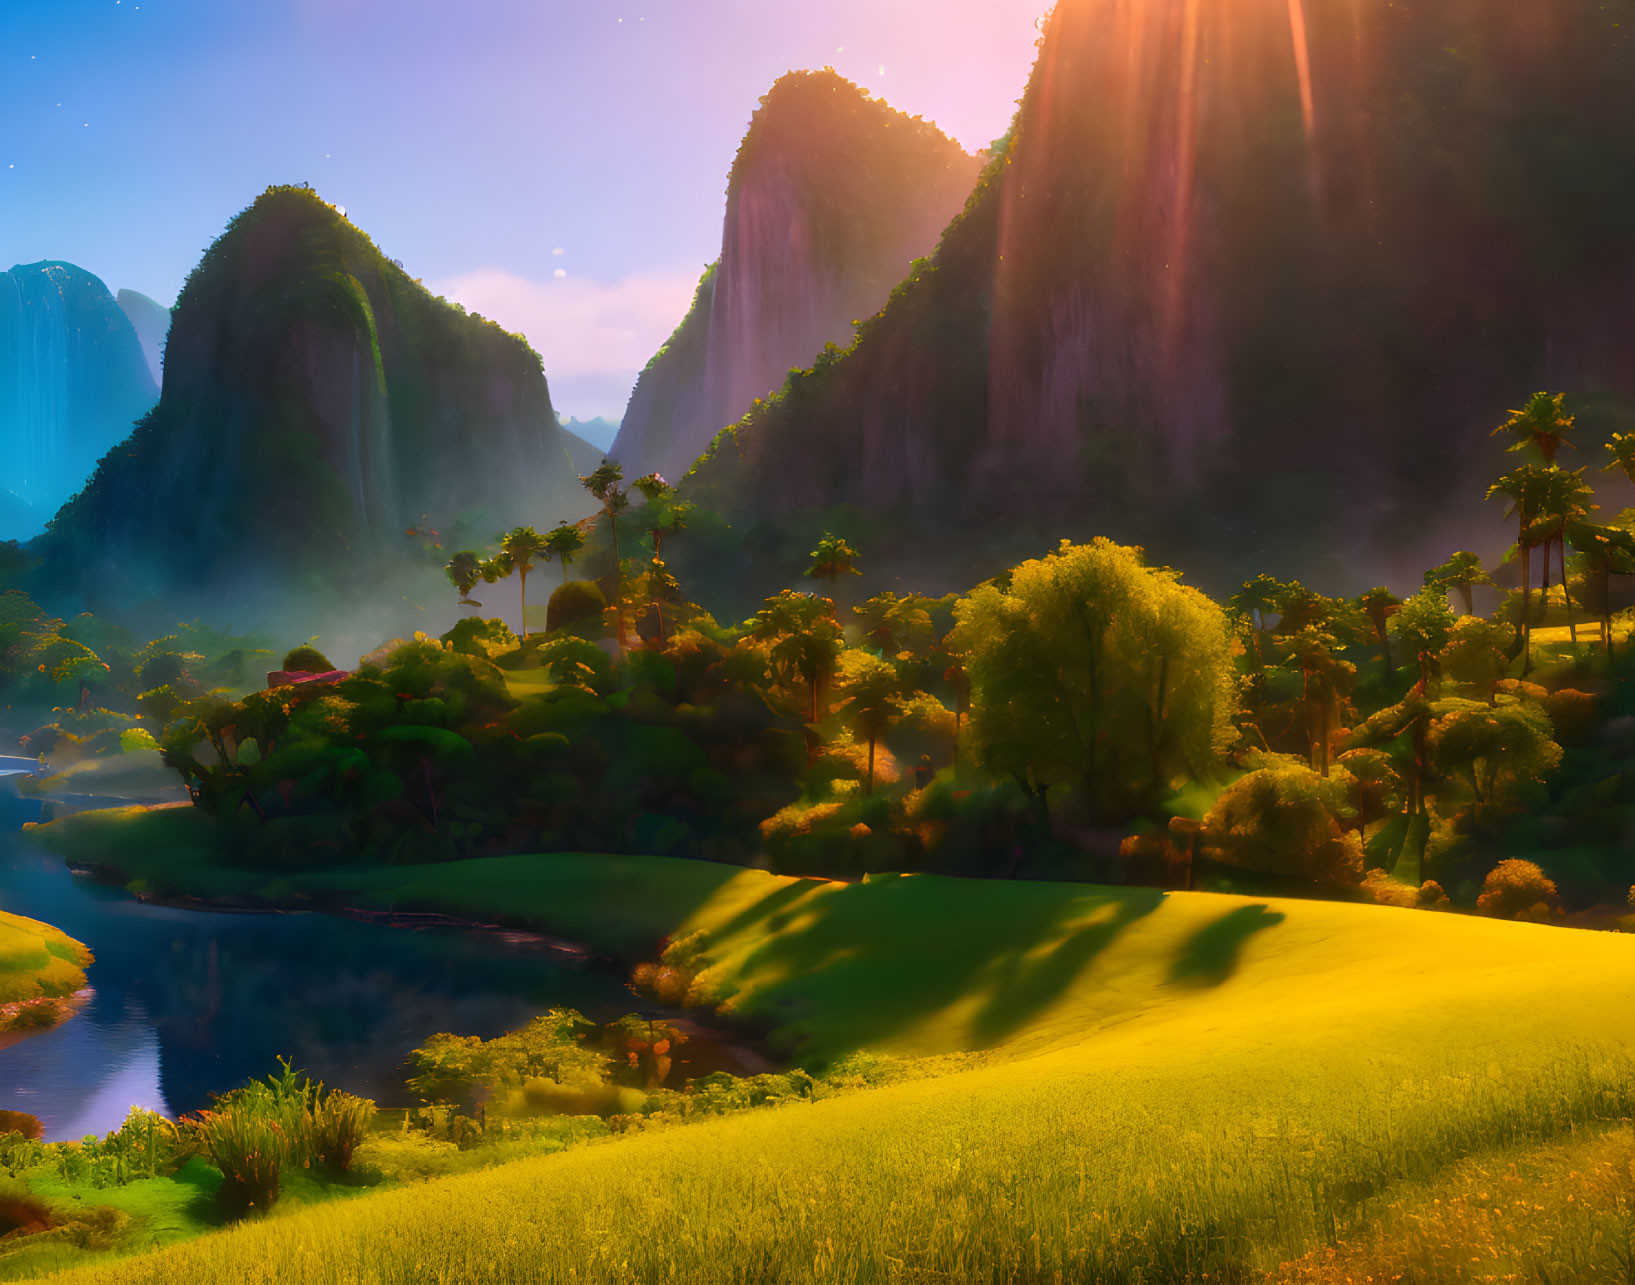 Scenic valley with river, green trees, and mountains at sunrise